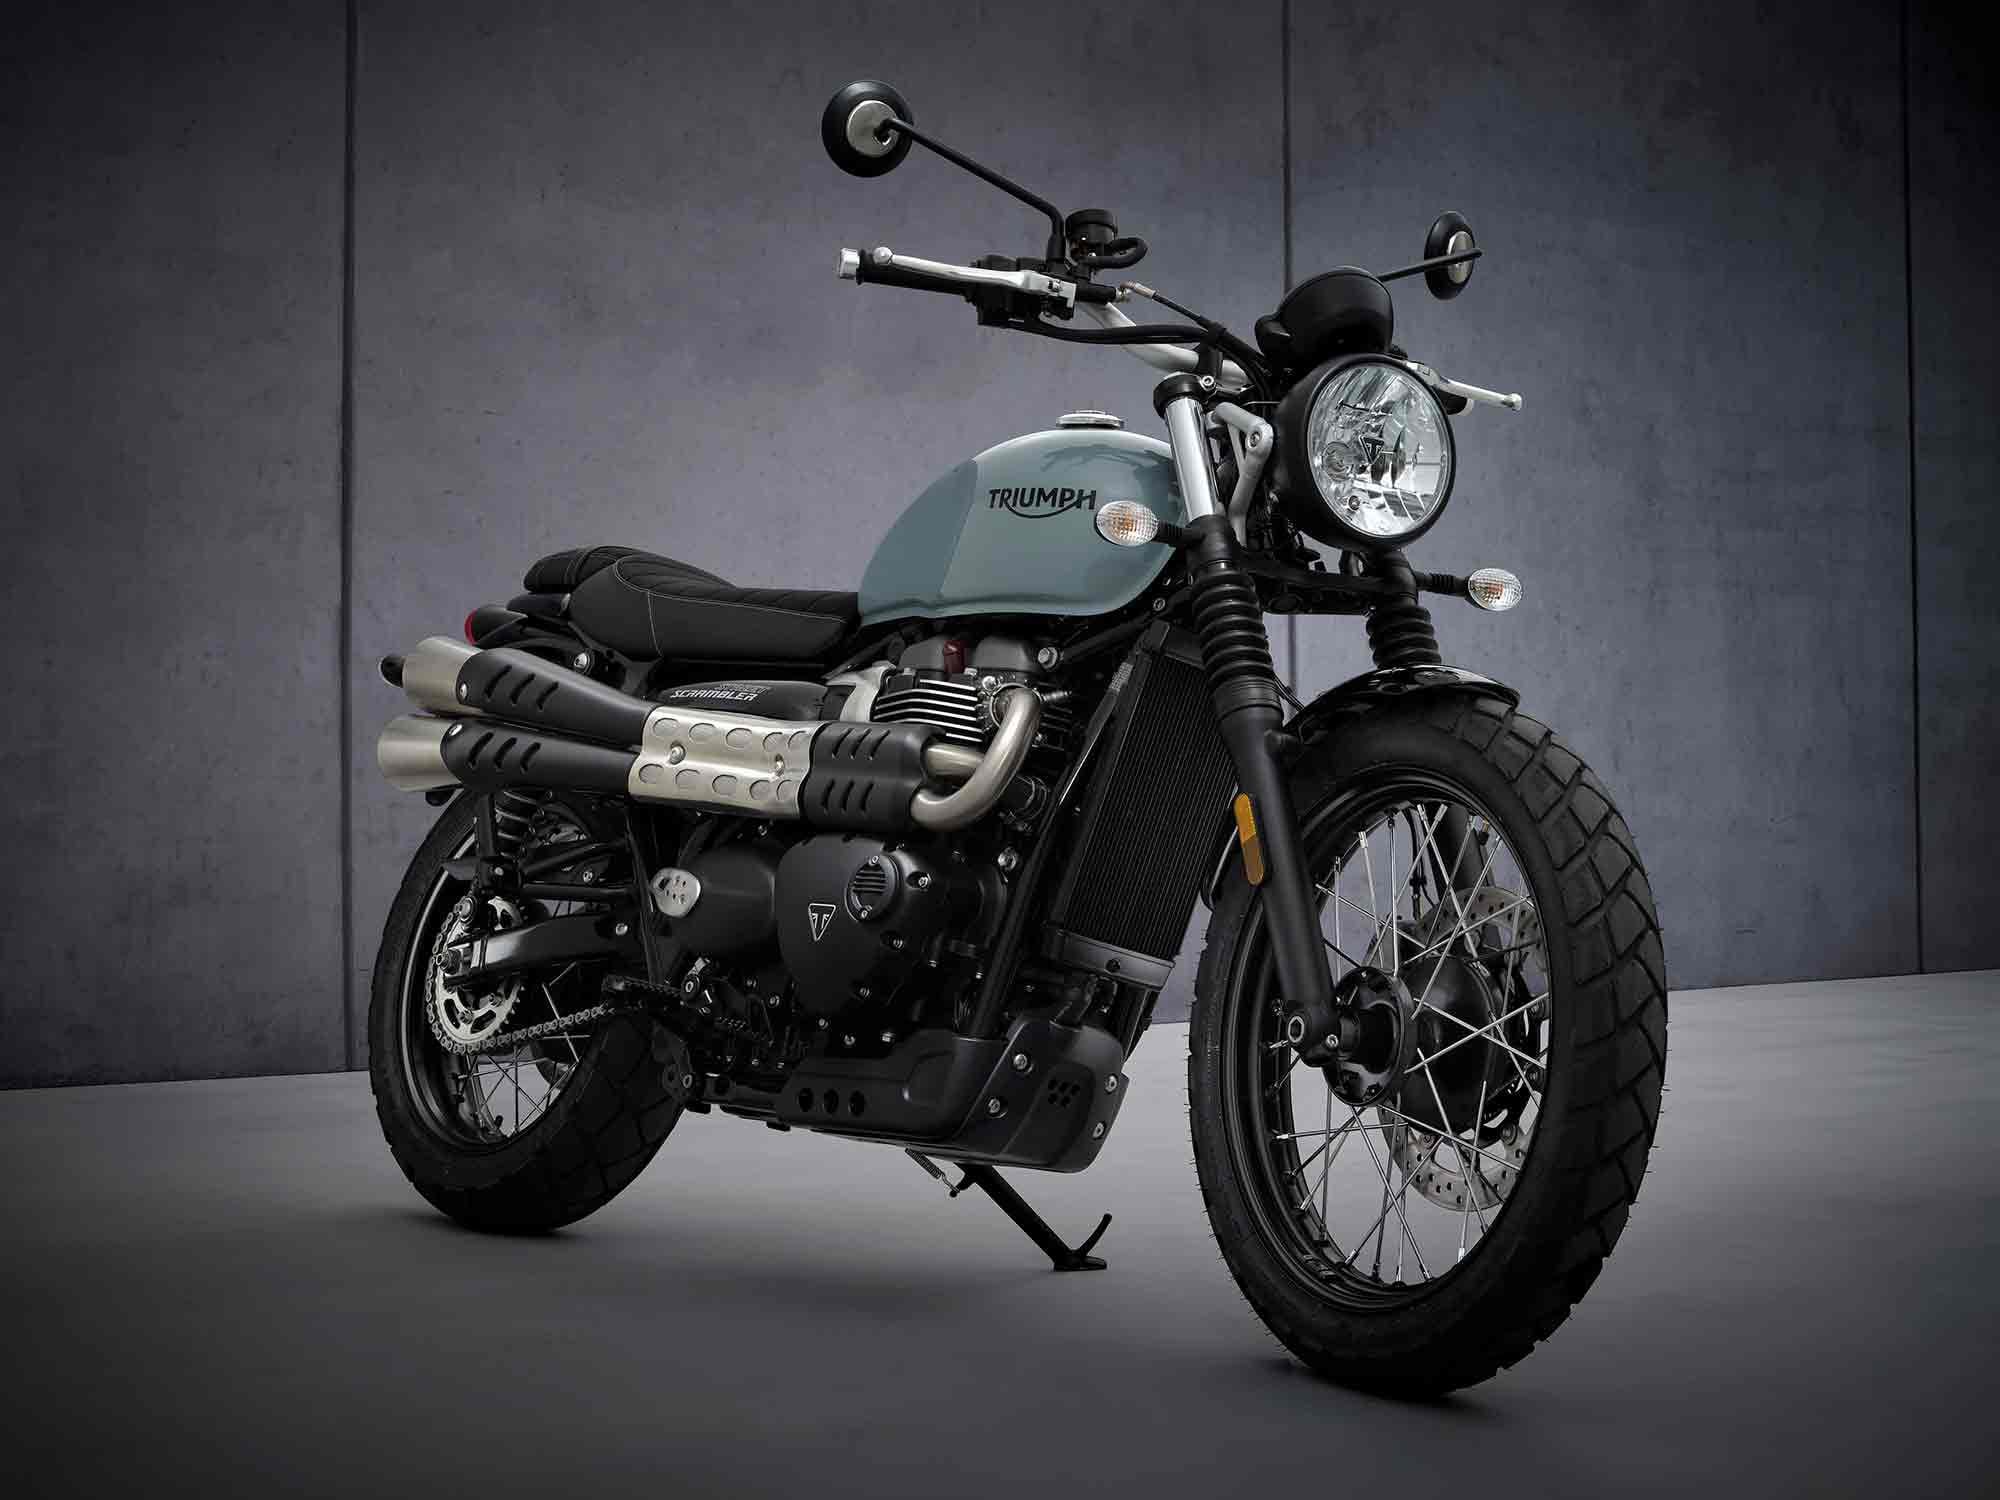 Here’s the base-model Street Scrambler. Both bikes get modest engine revisions to meet Euro 5 emissions standards and subtle styling updates as well.